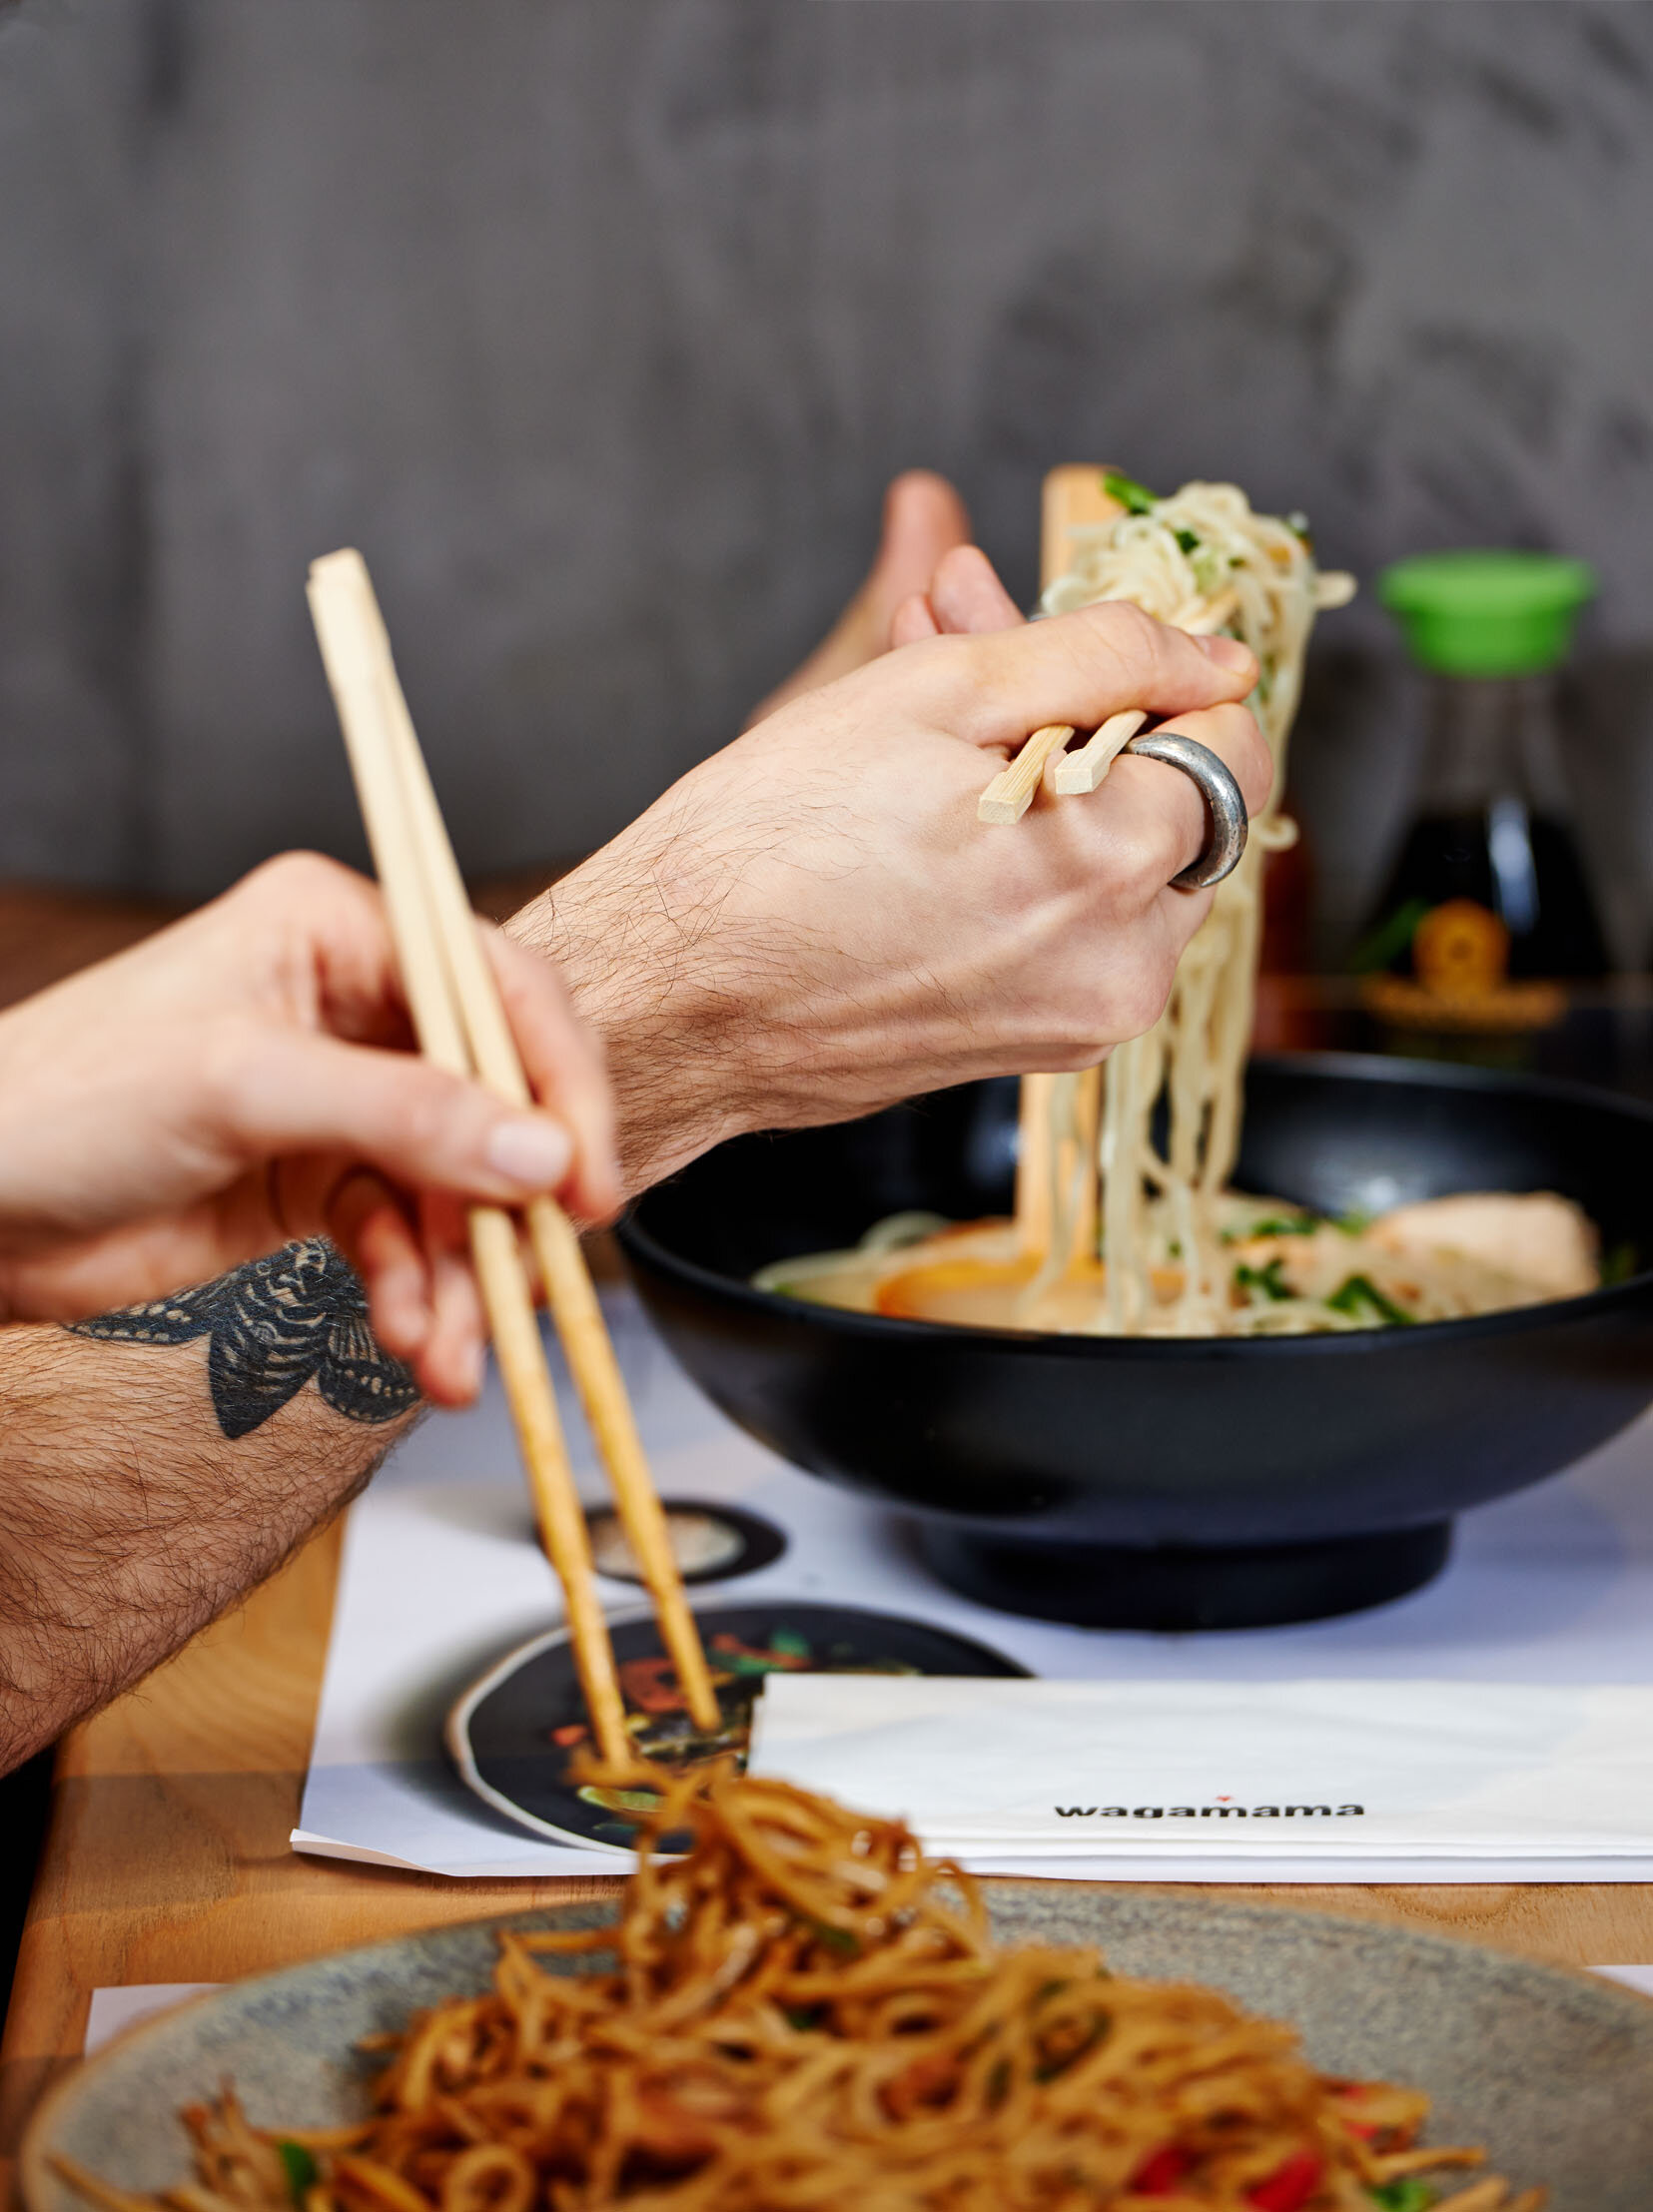 Wagamama food advertising campaign photographed by Holly Pickering